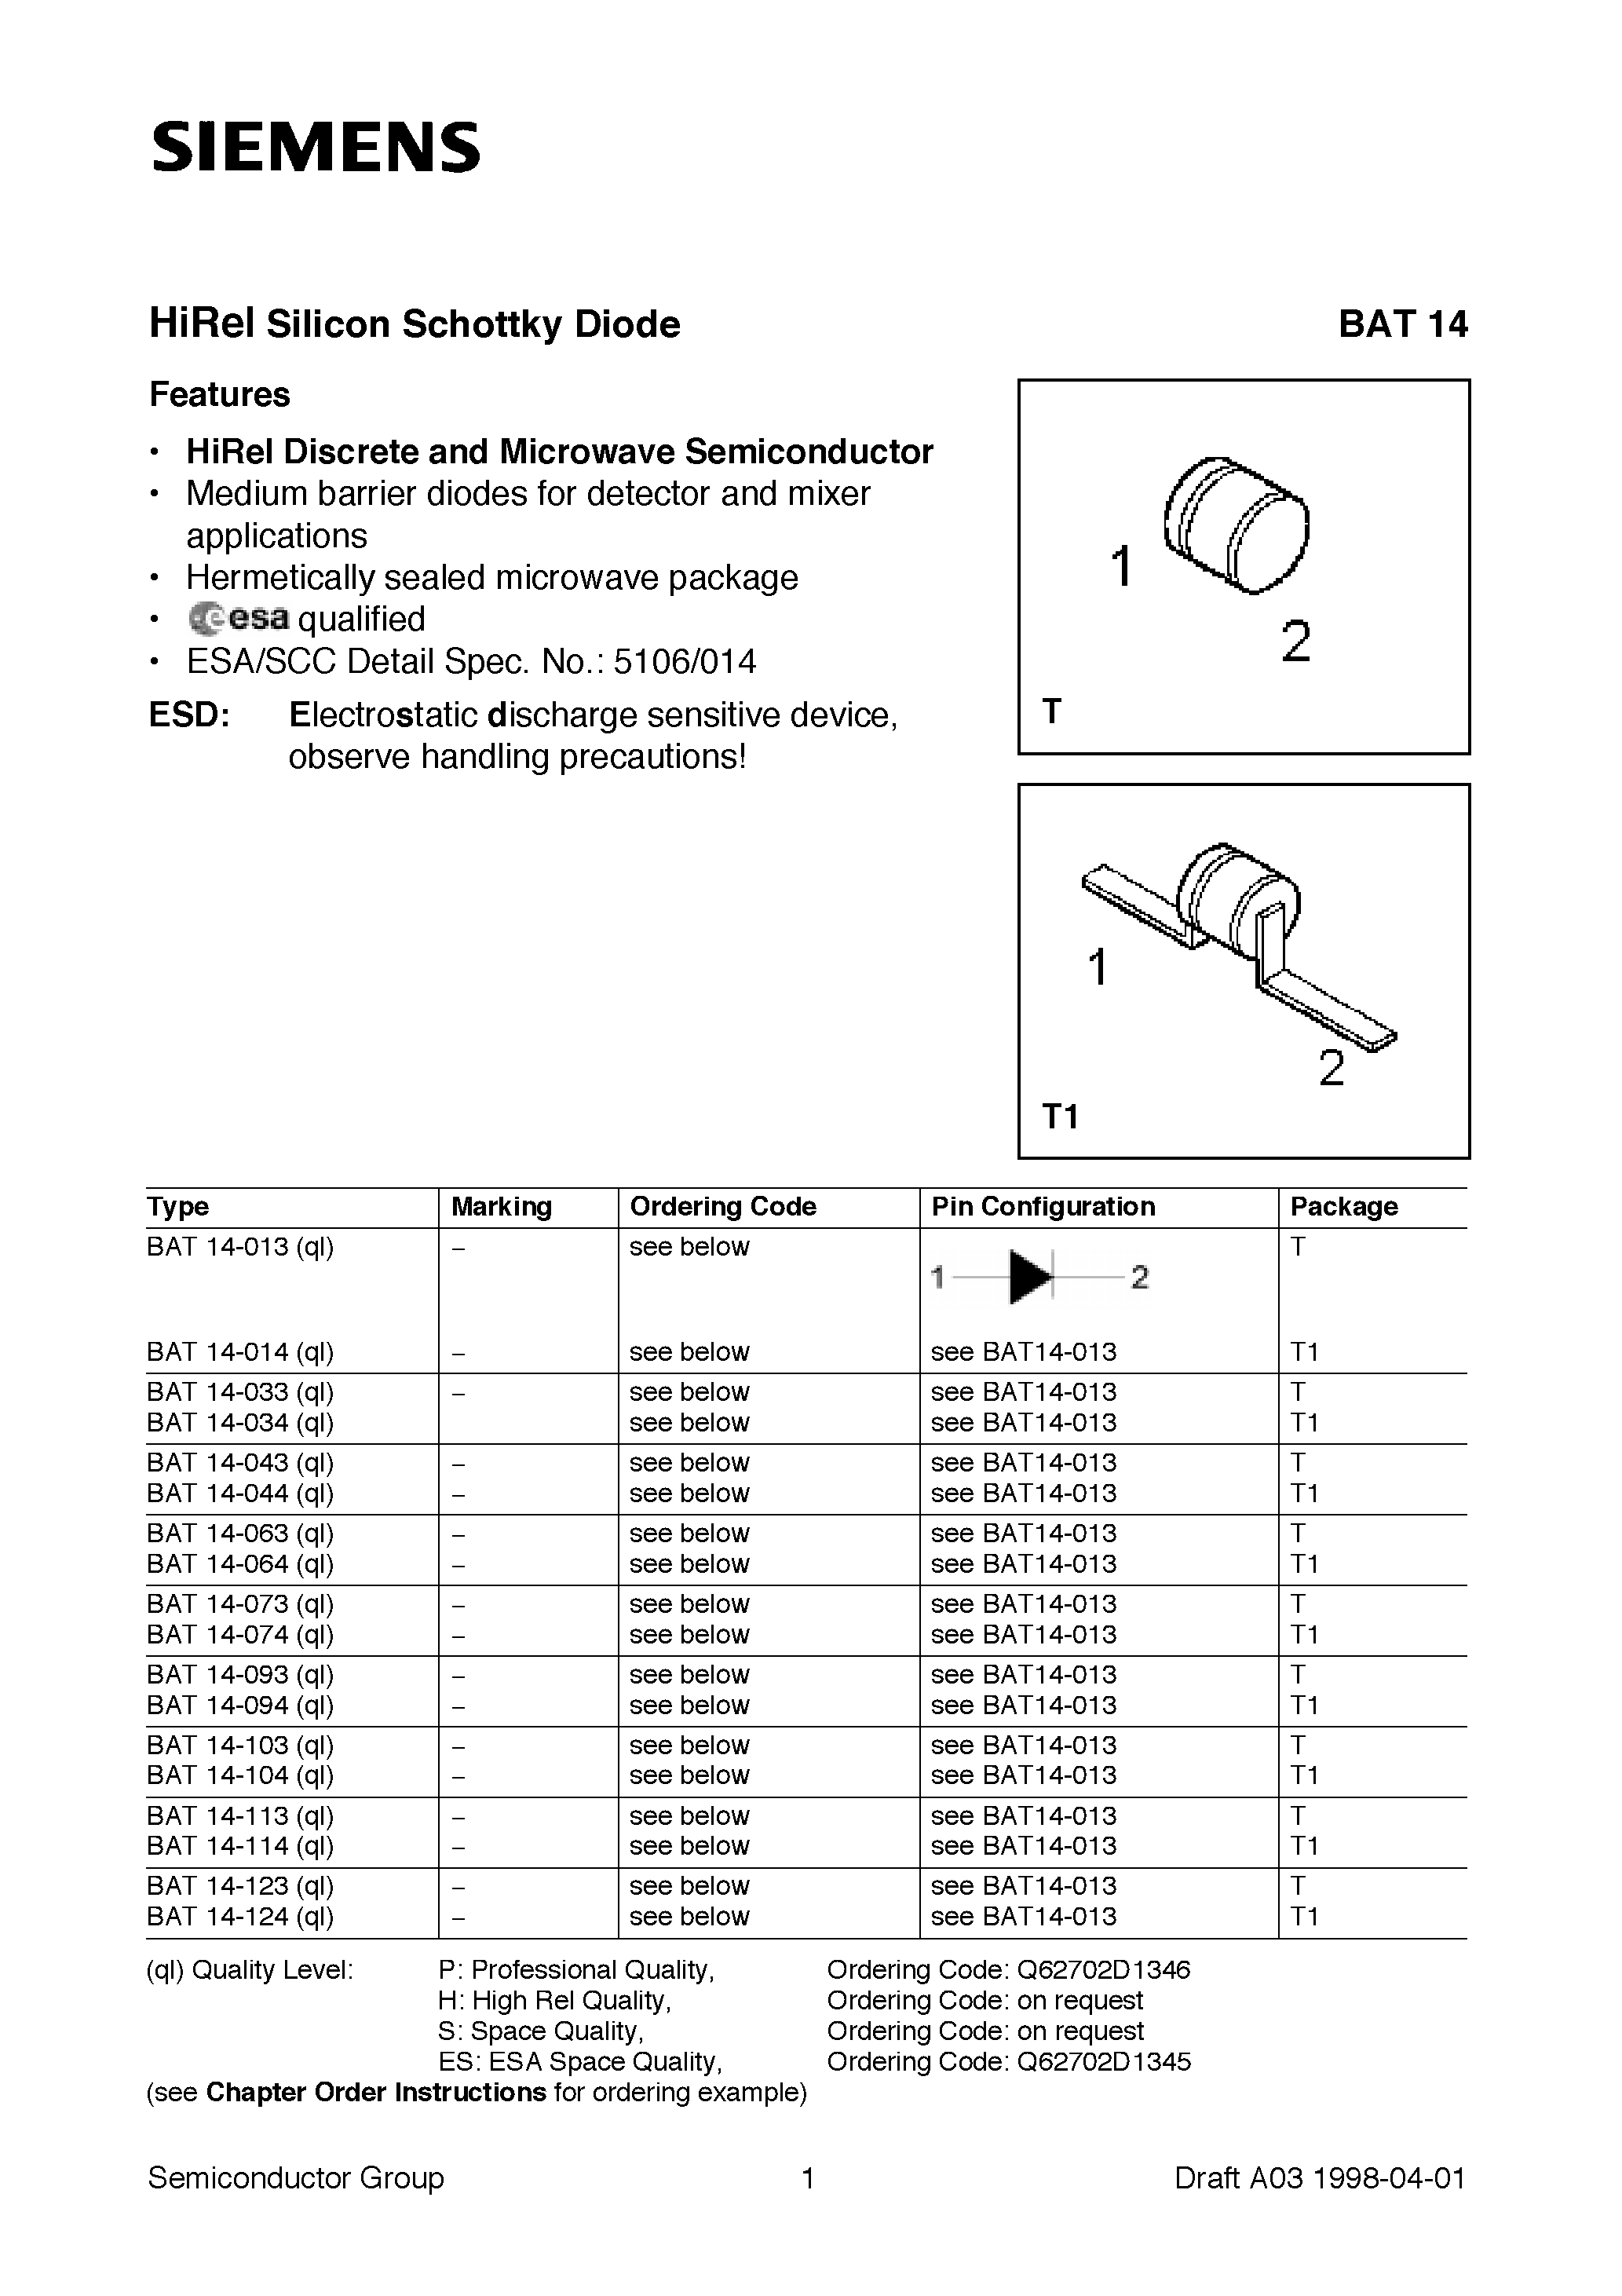 Datasheet BAT14-013 - HiRel Silicon Schottky Diode (HiRel Discrete and Microwave Semiconductor Medium barrier diodes for detector and mixer applications) page 1